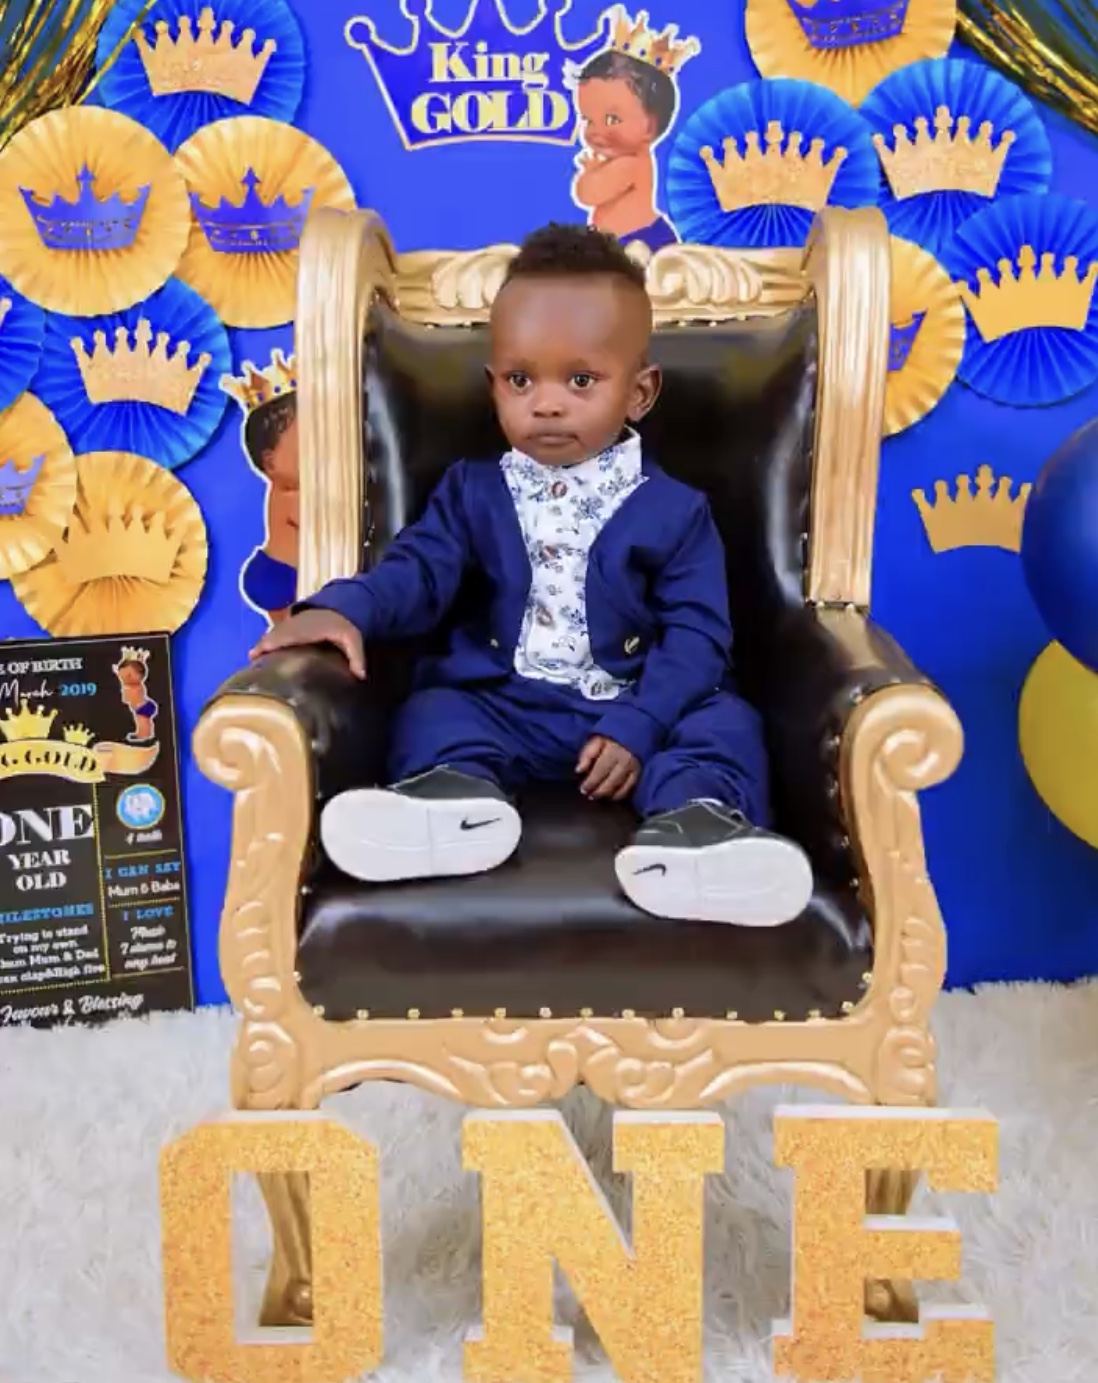 King Gold! Mr Seed and wife celebrate son’s 1st birthday